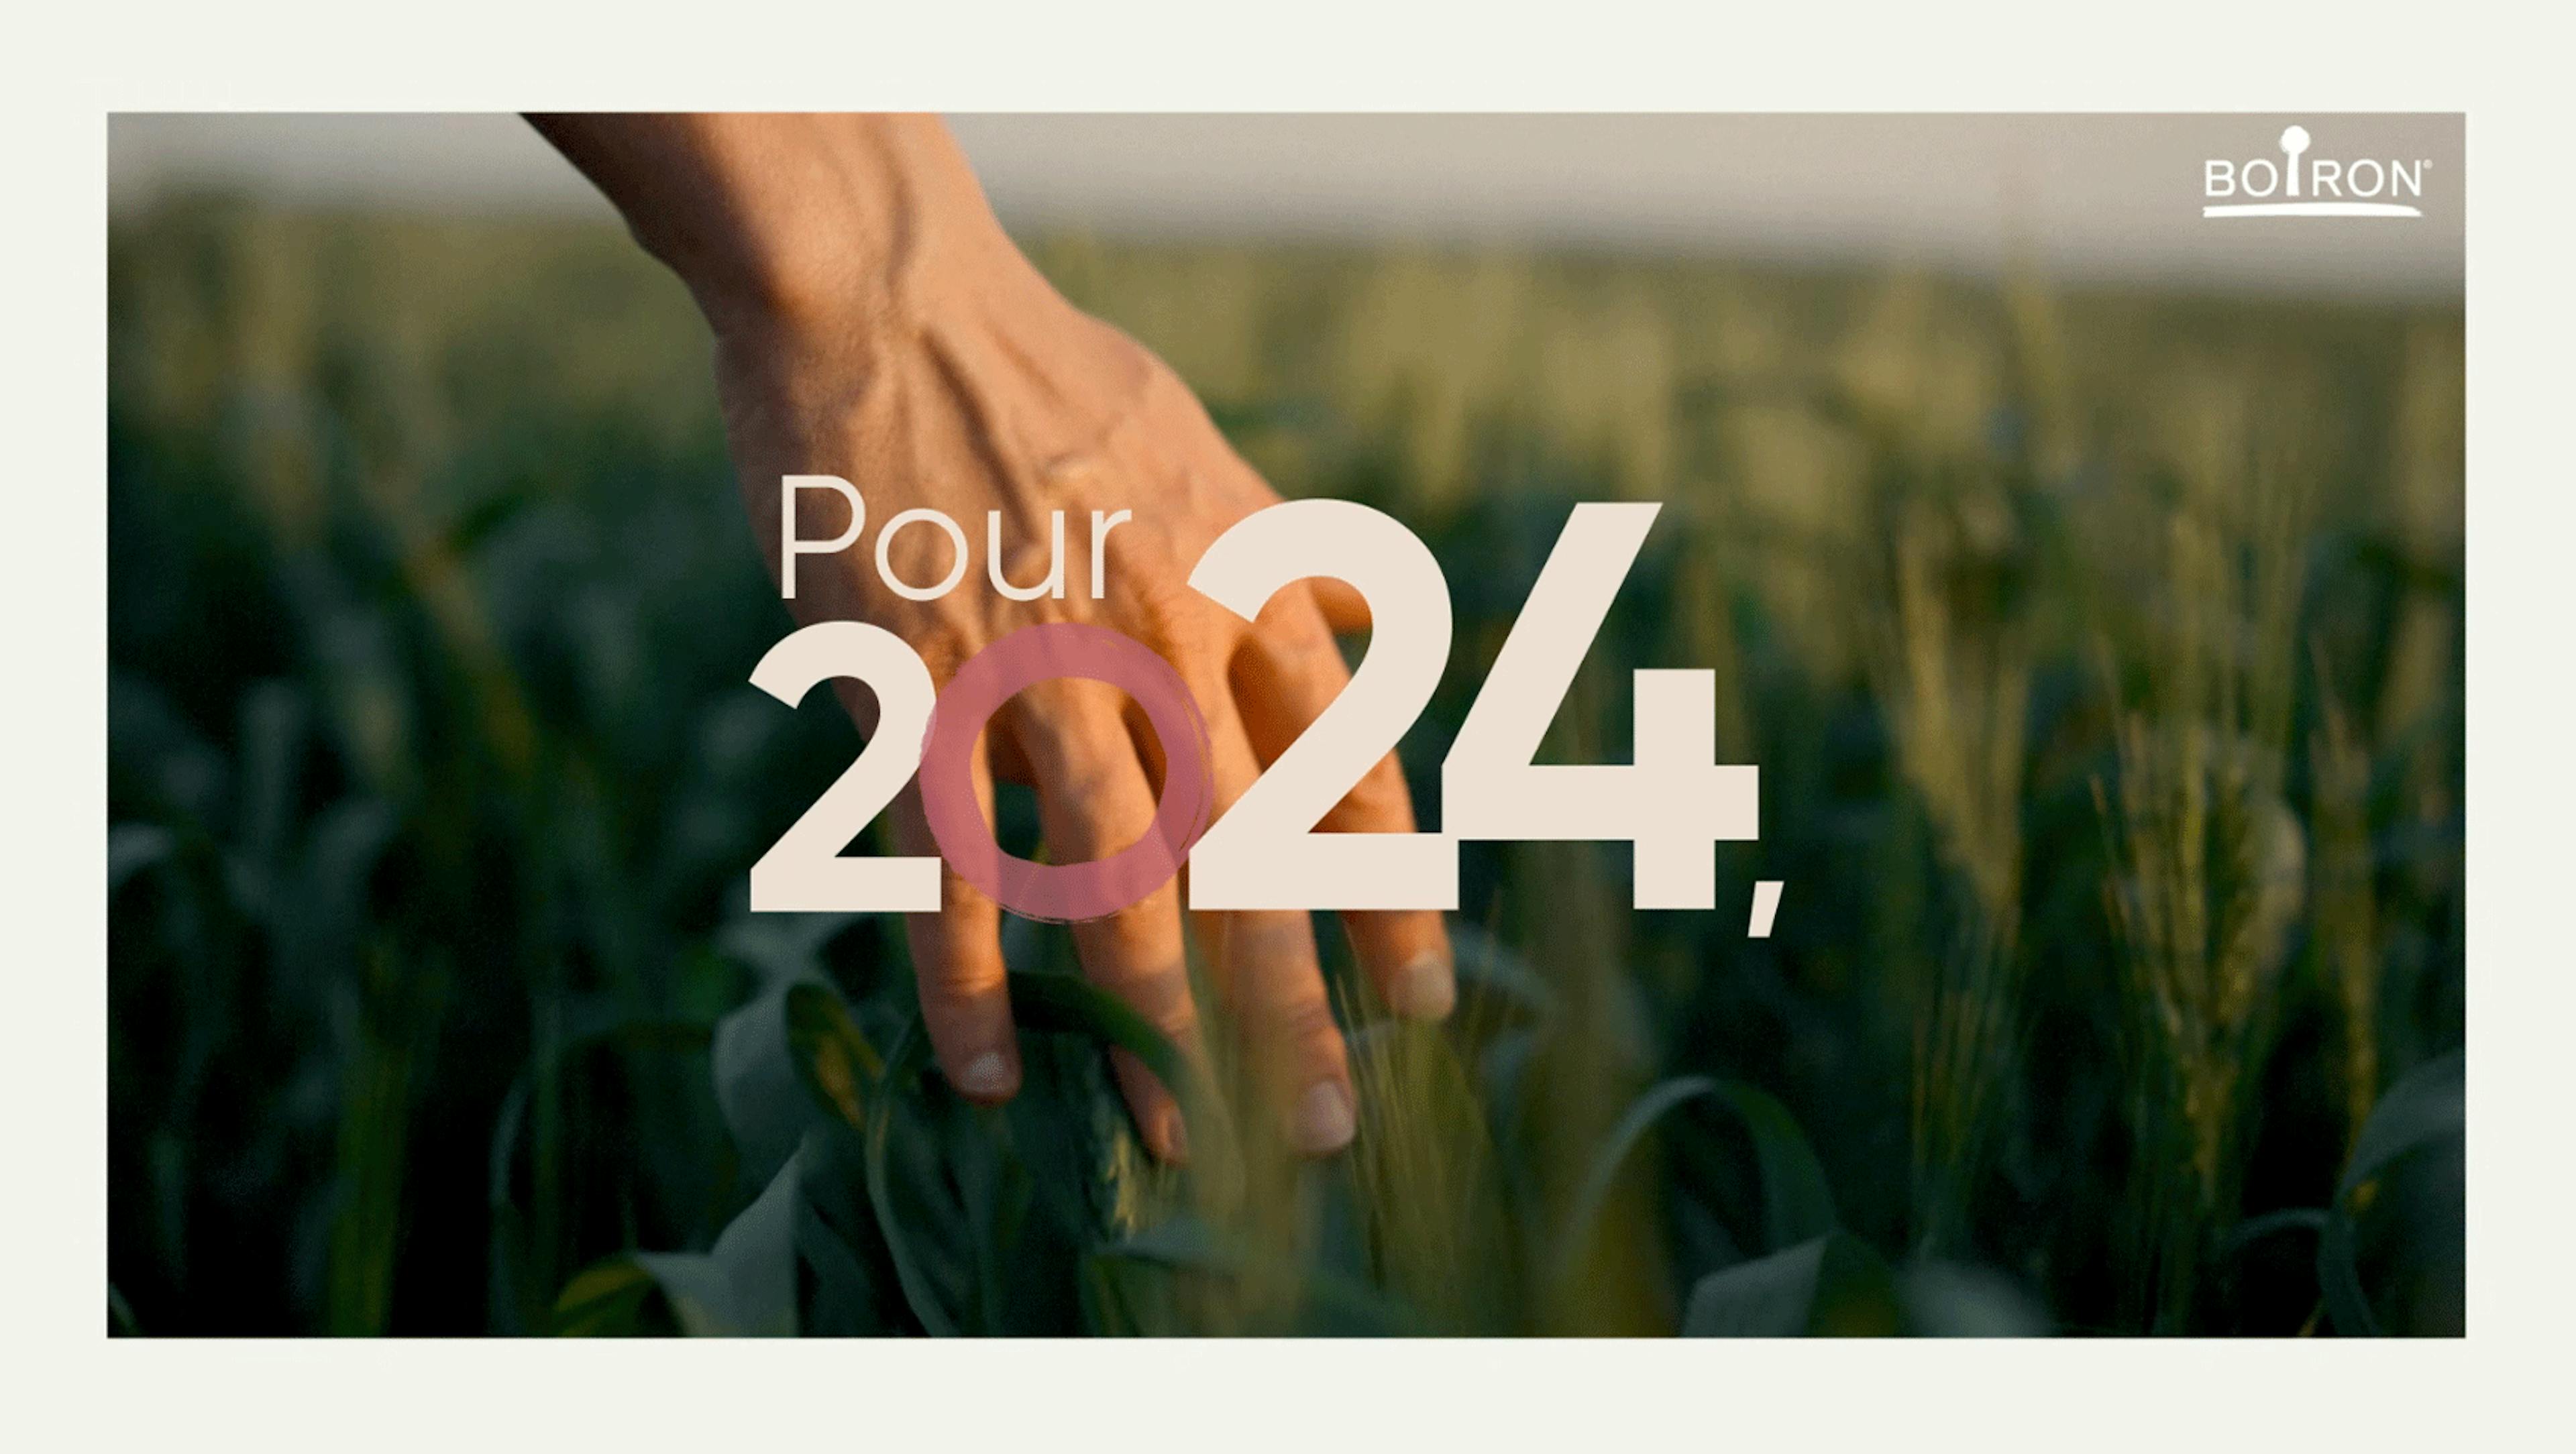 Preview voeux boiron 2024